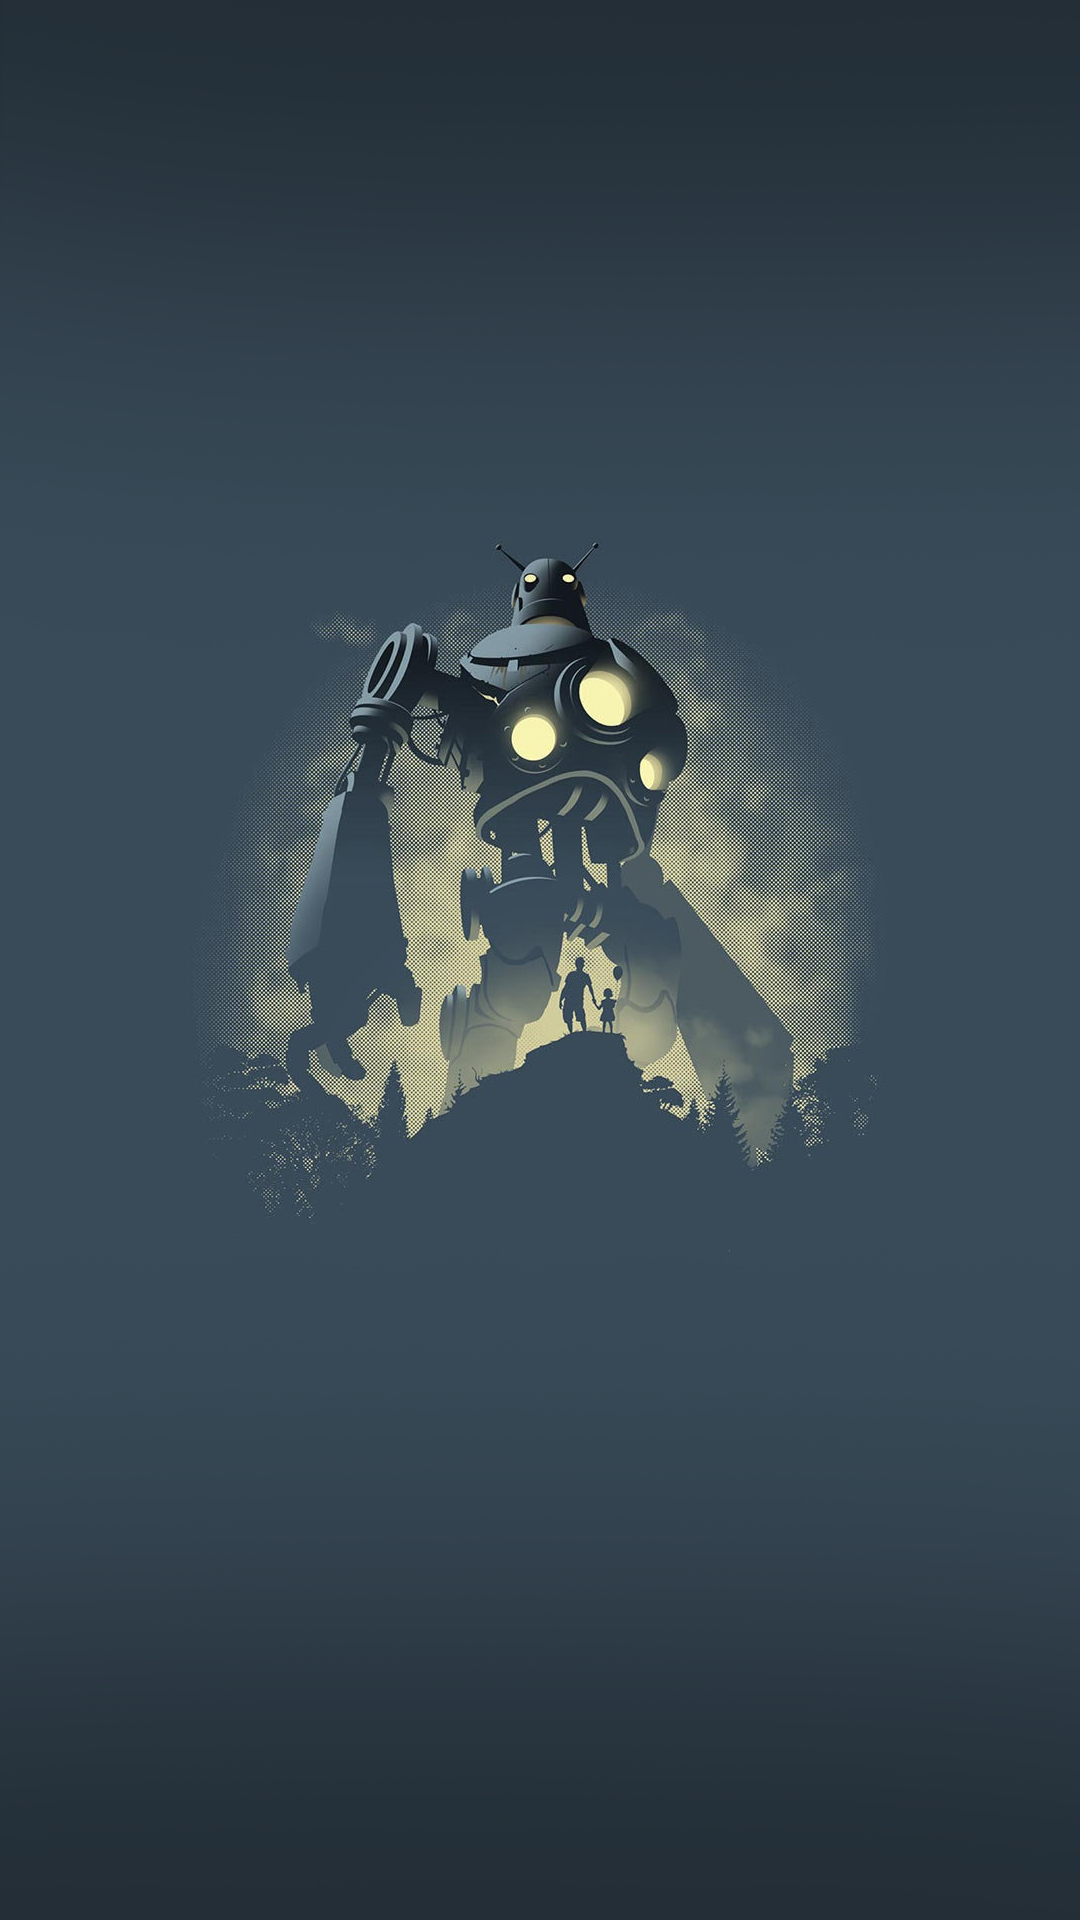 General 1080x1920 iron giant cartoon animated character portrait display simple background minimalism robot